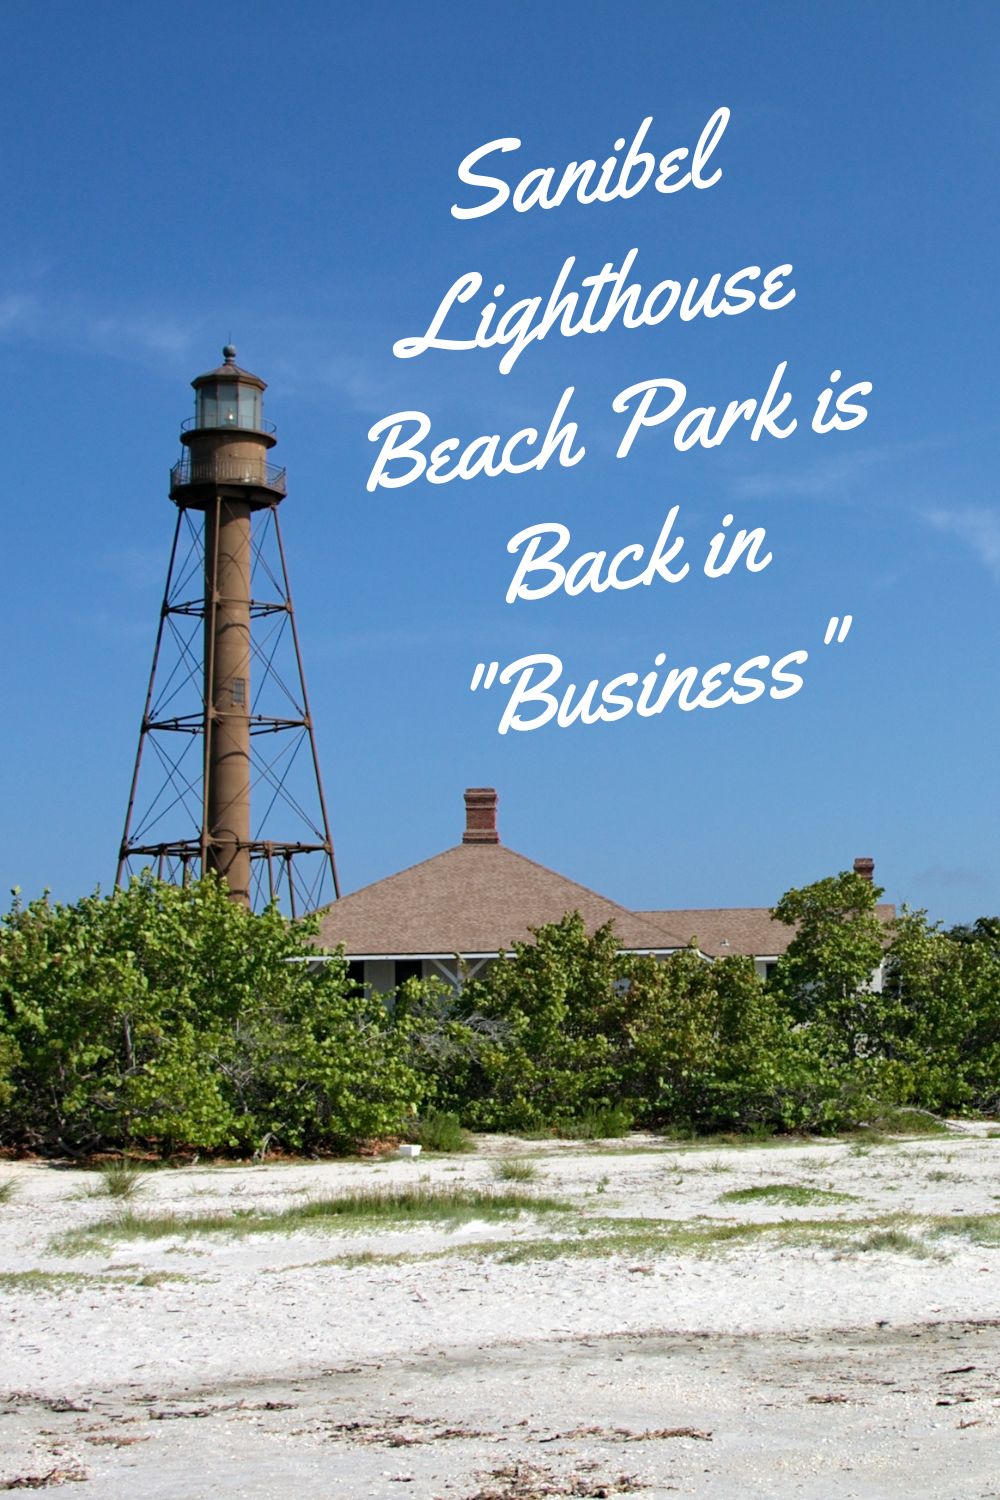 Sanibel Lighthouse Beach Park is Back in "Business"